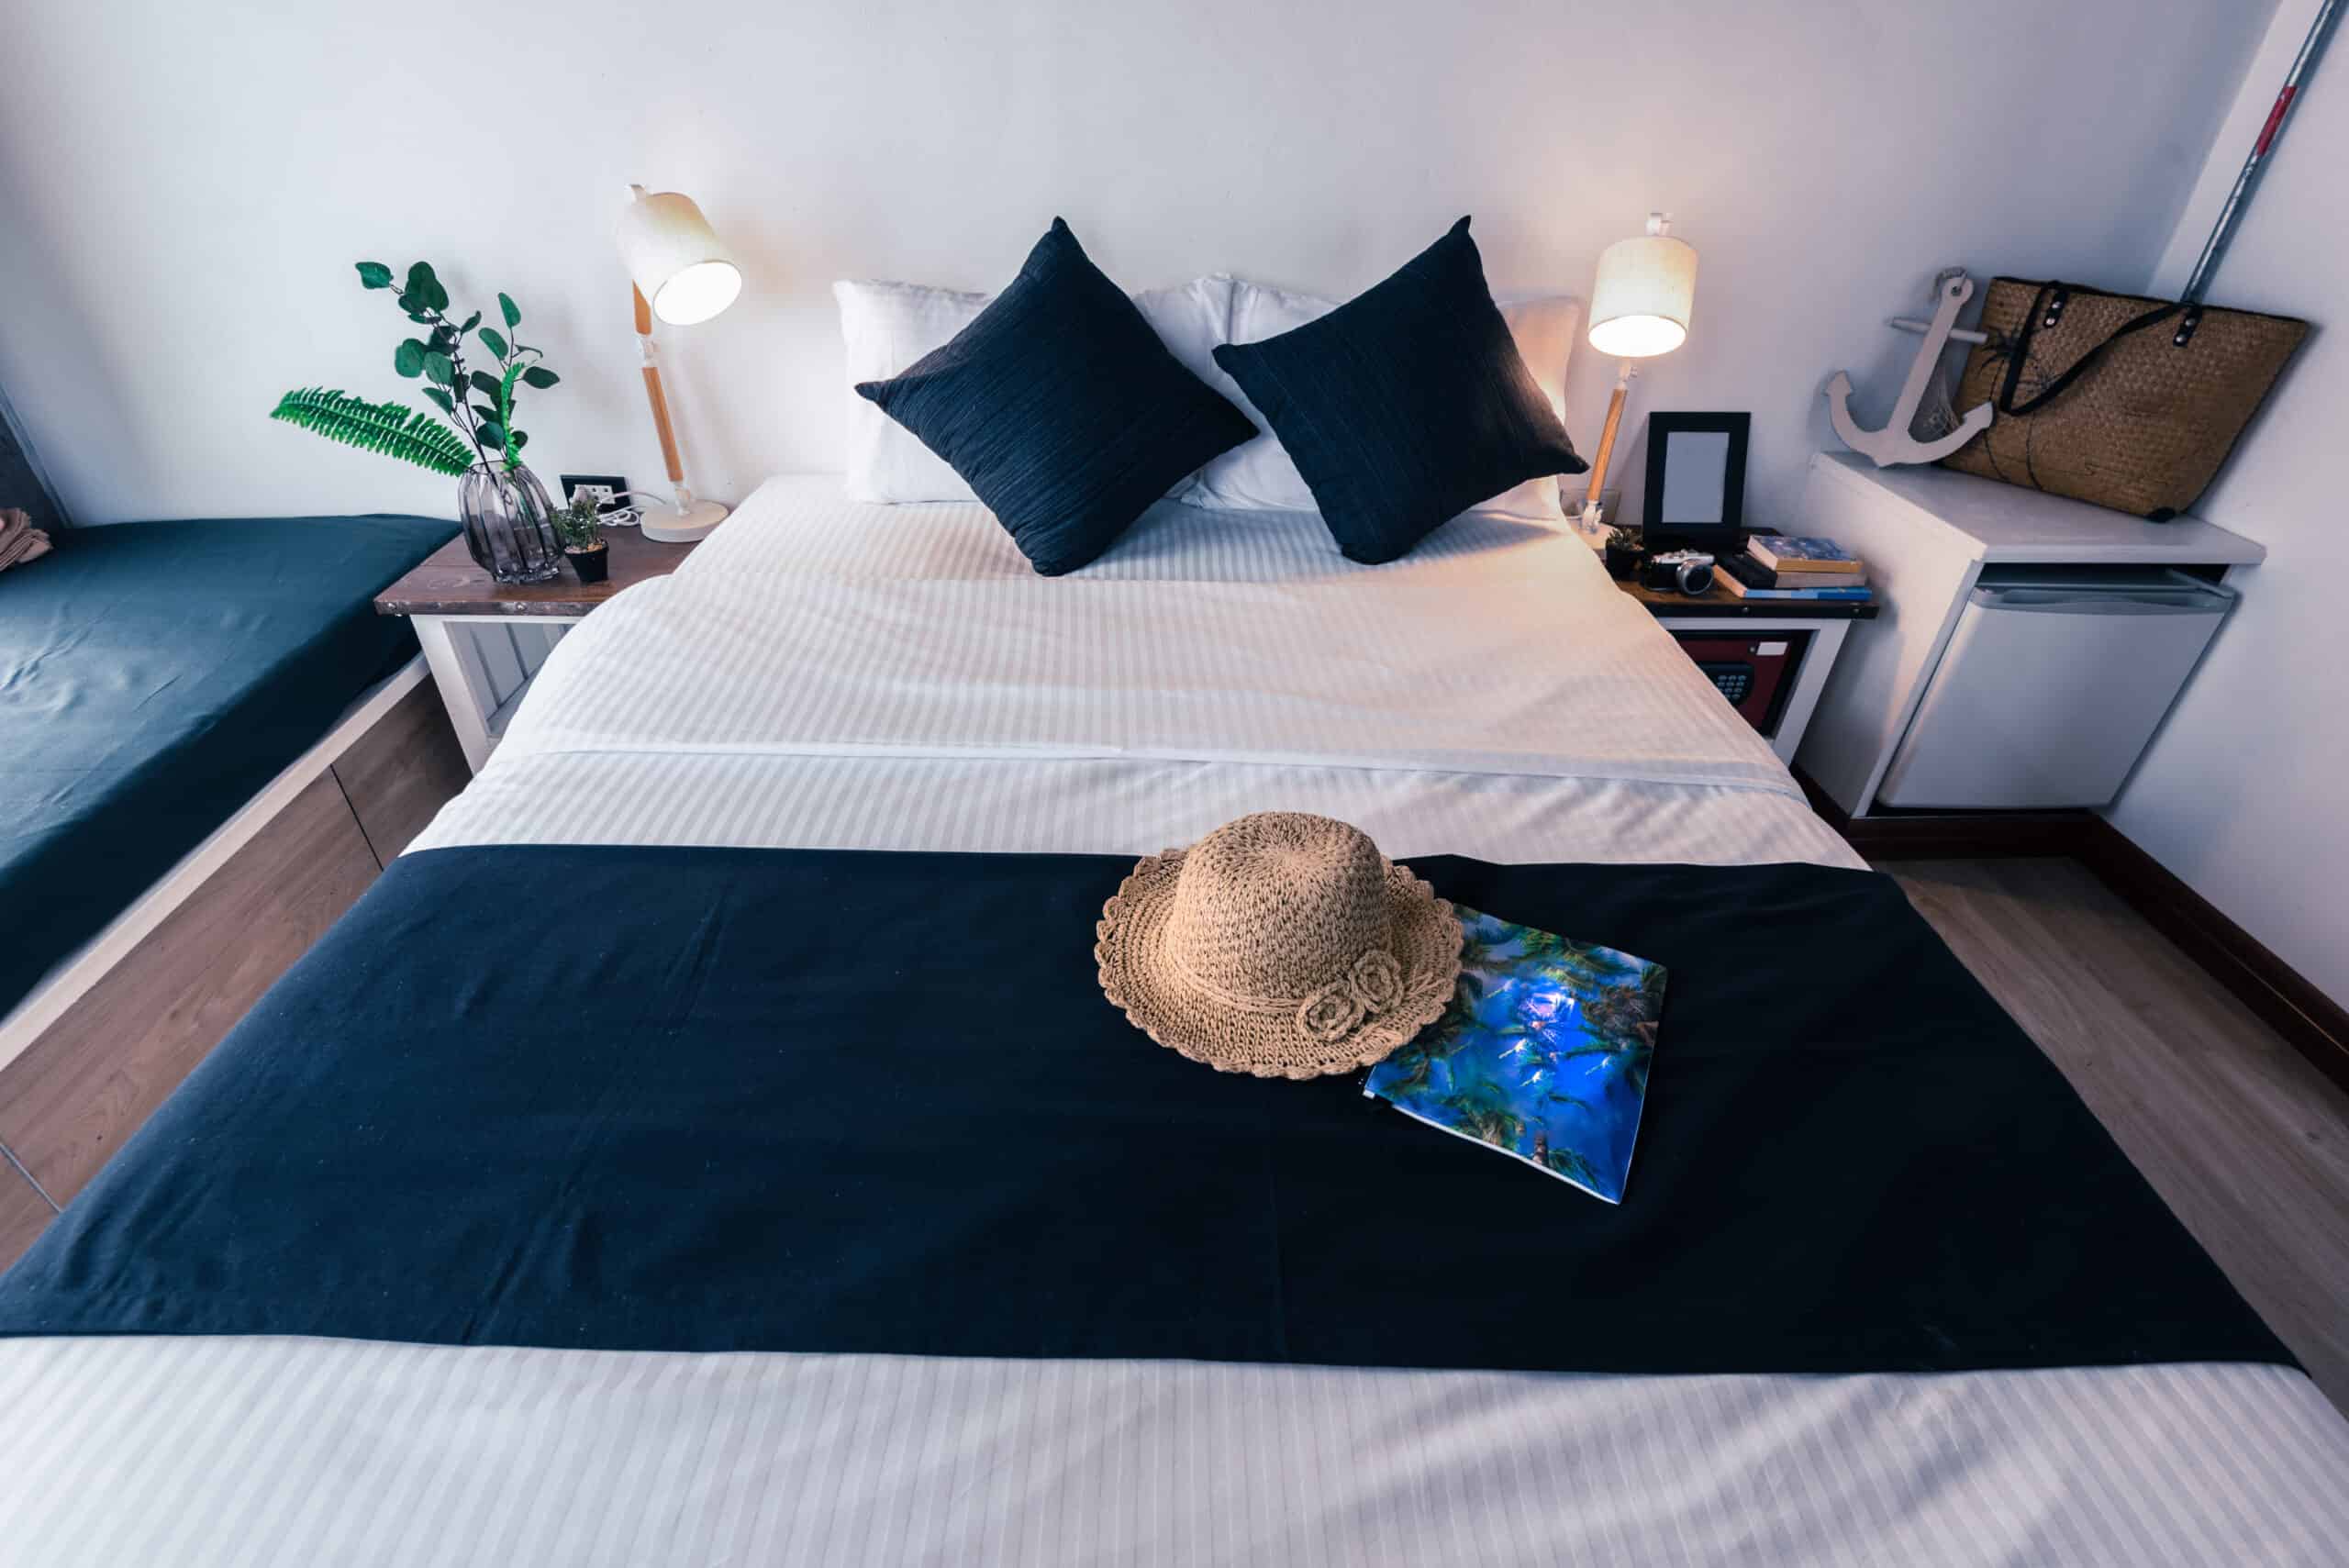 A bedroom in a vacation rental Airbnb with a modern-style bed with a black runner sheet and black pillows.